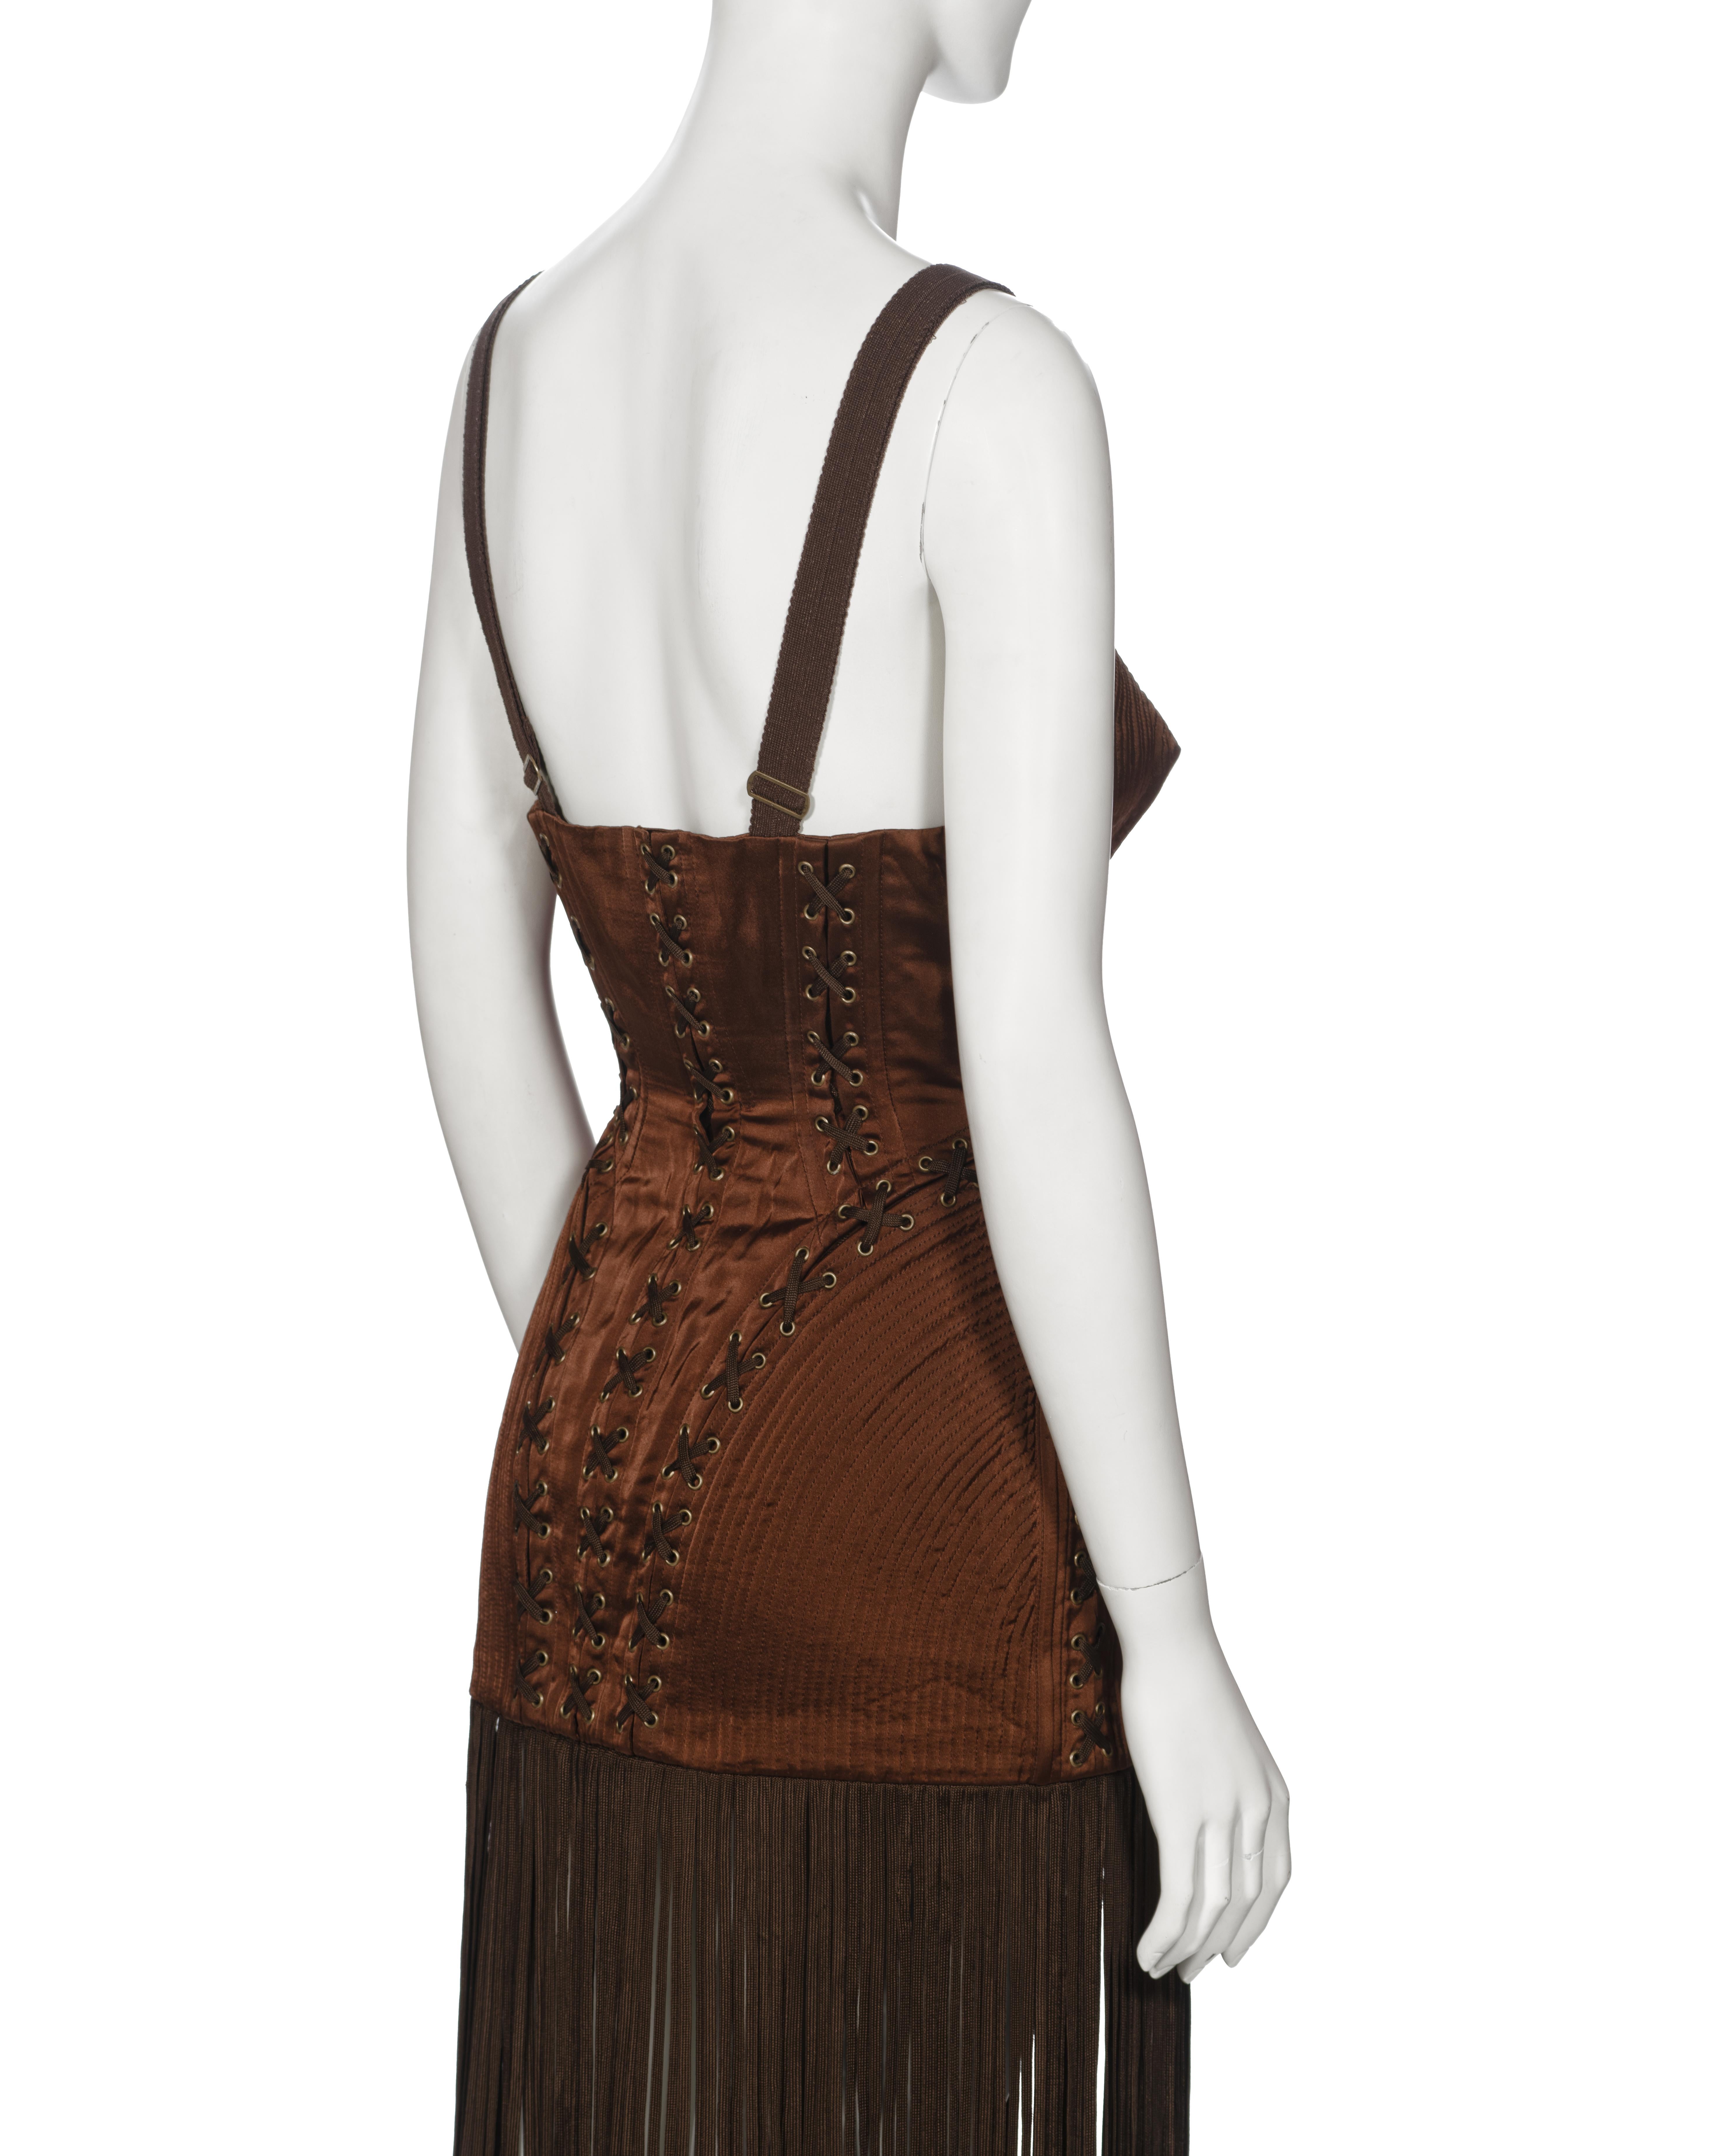 Jean Paul Gaultier Brown Corset Dress with Cone Bra and Fringed Hem, fw 1990 For Sale 8